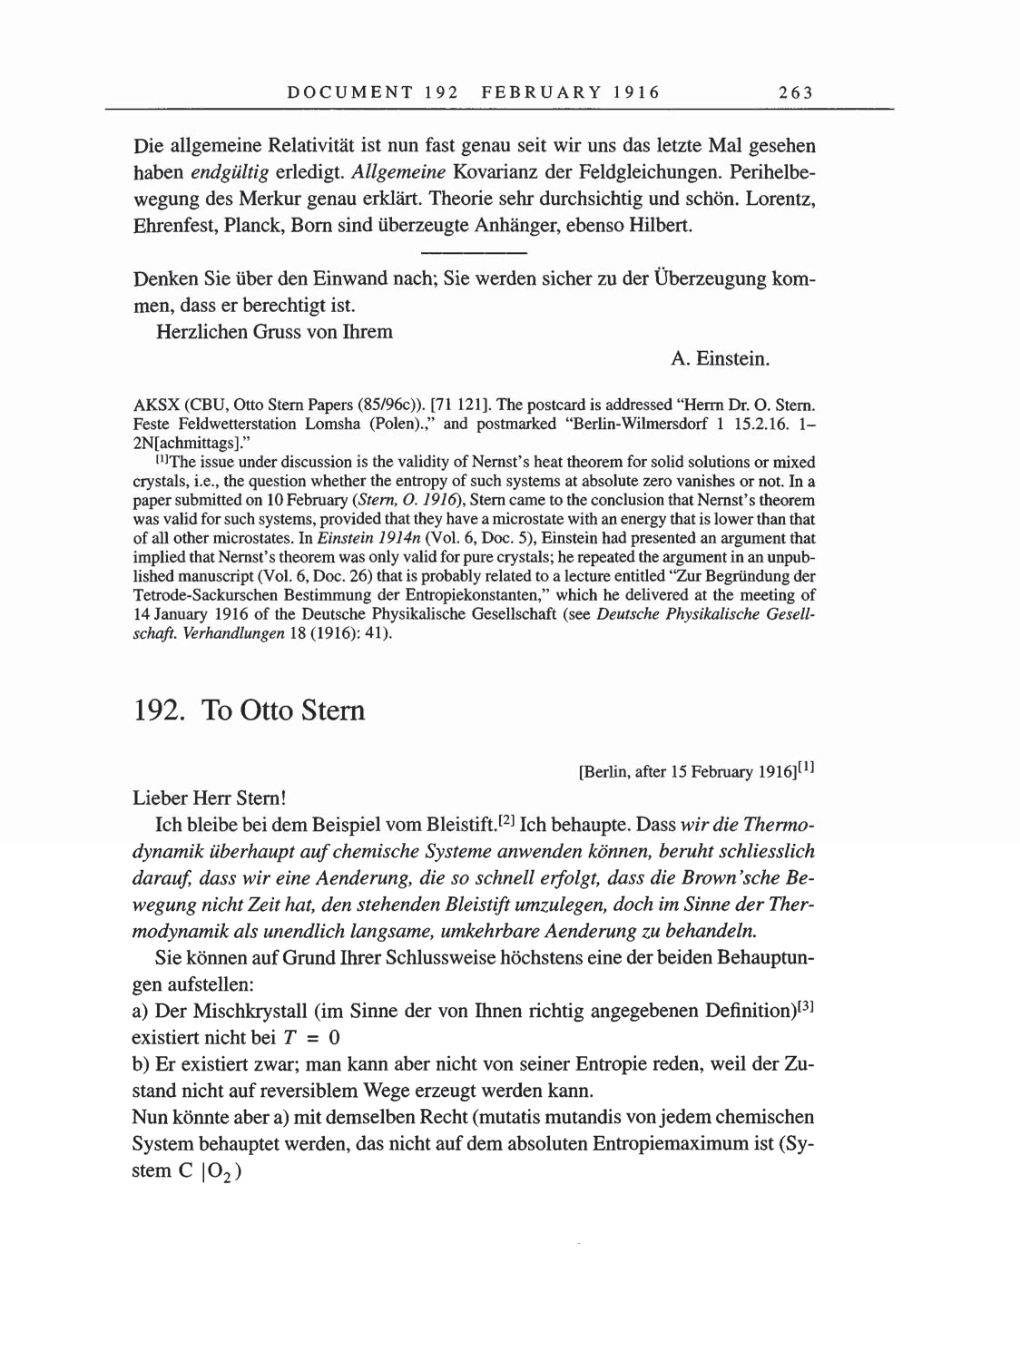 Volume 8, Part A: The Berlin Years: Correspondence 1914-1917 page 263